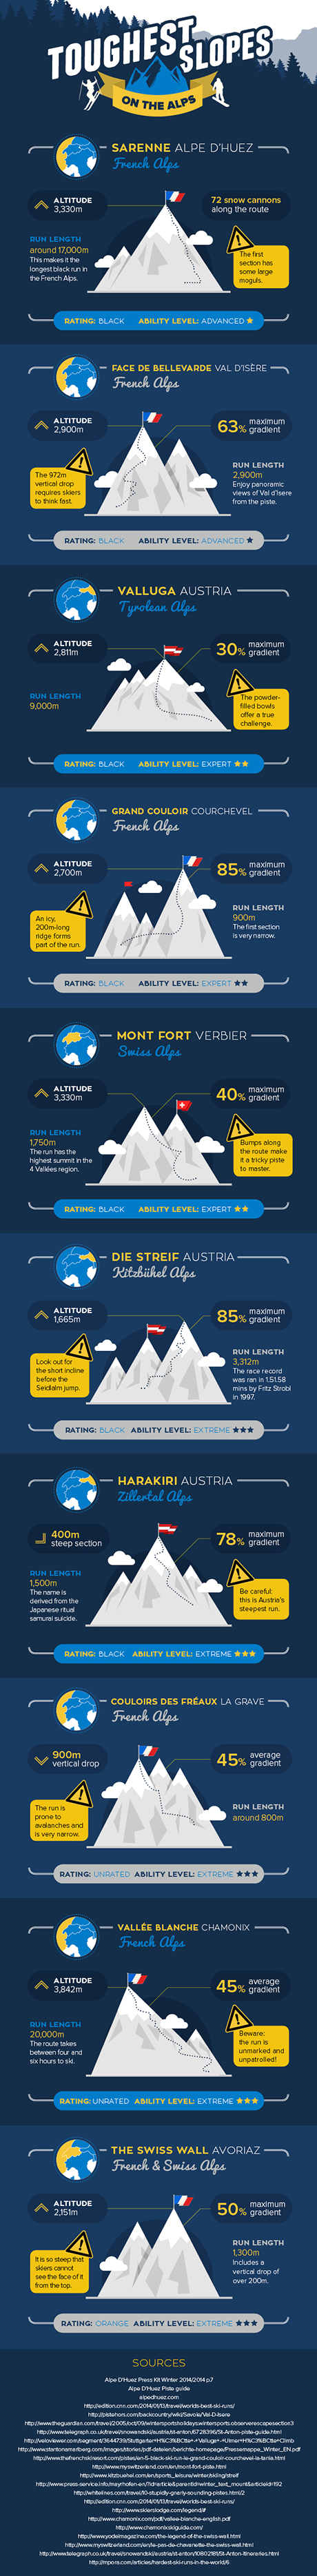 Toughest slopes on the Alps